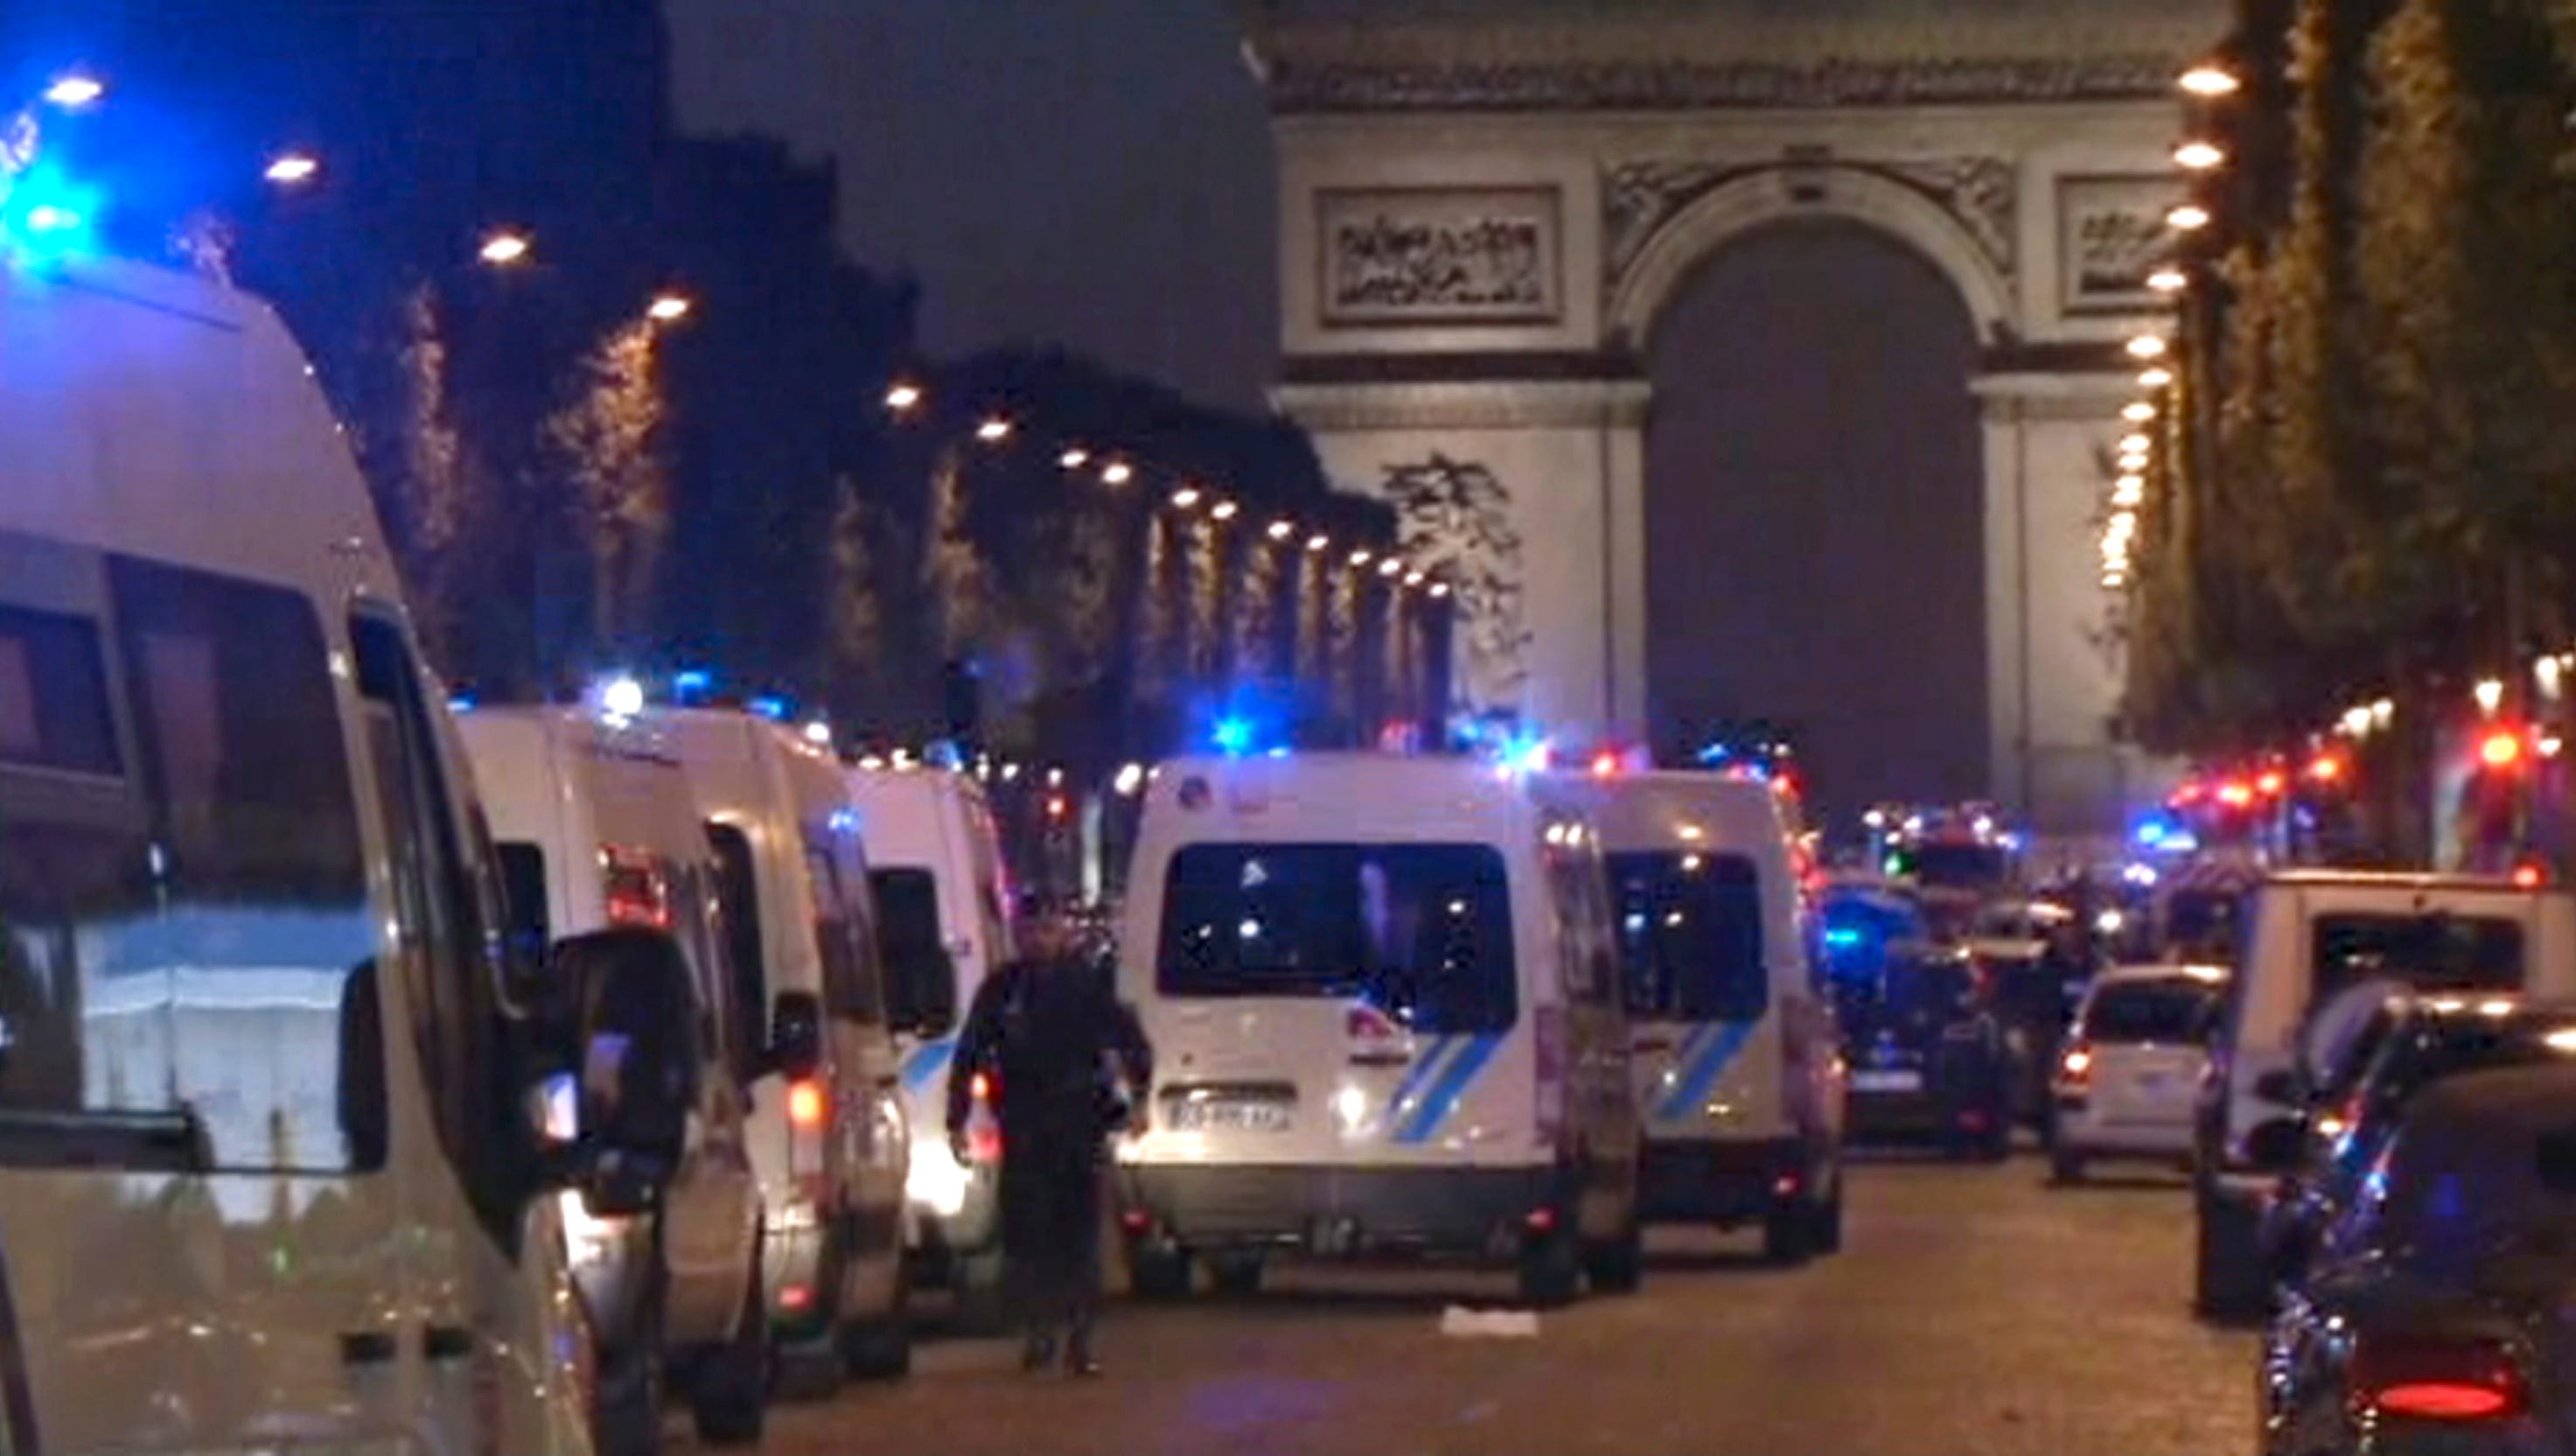 Paris Terror Attack Police Search Home After Officers Death On Champs